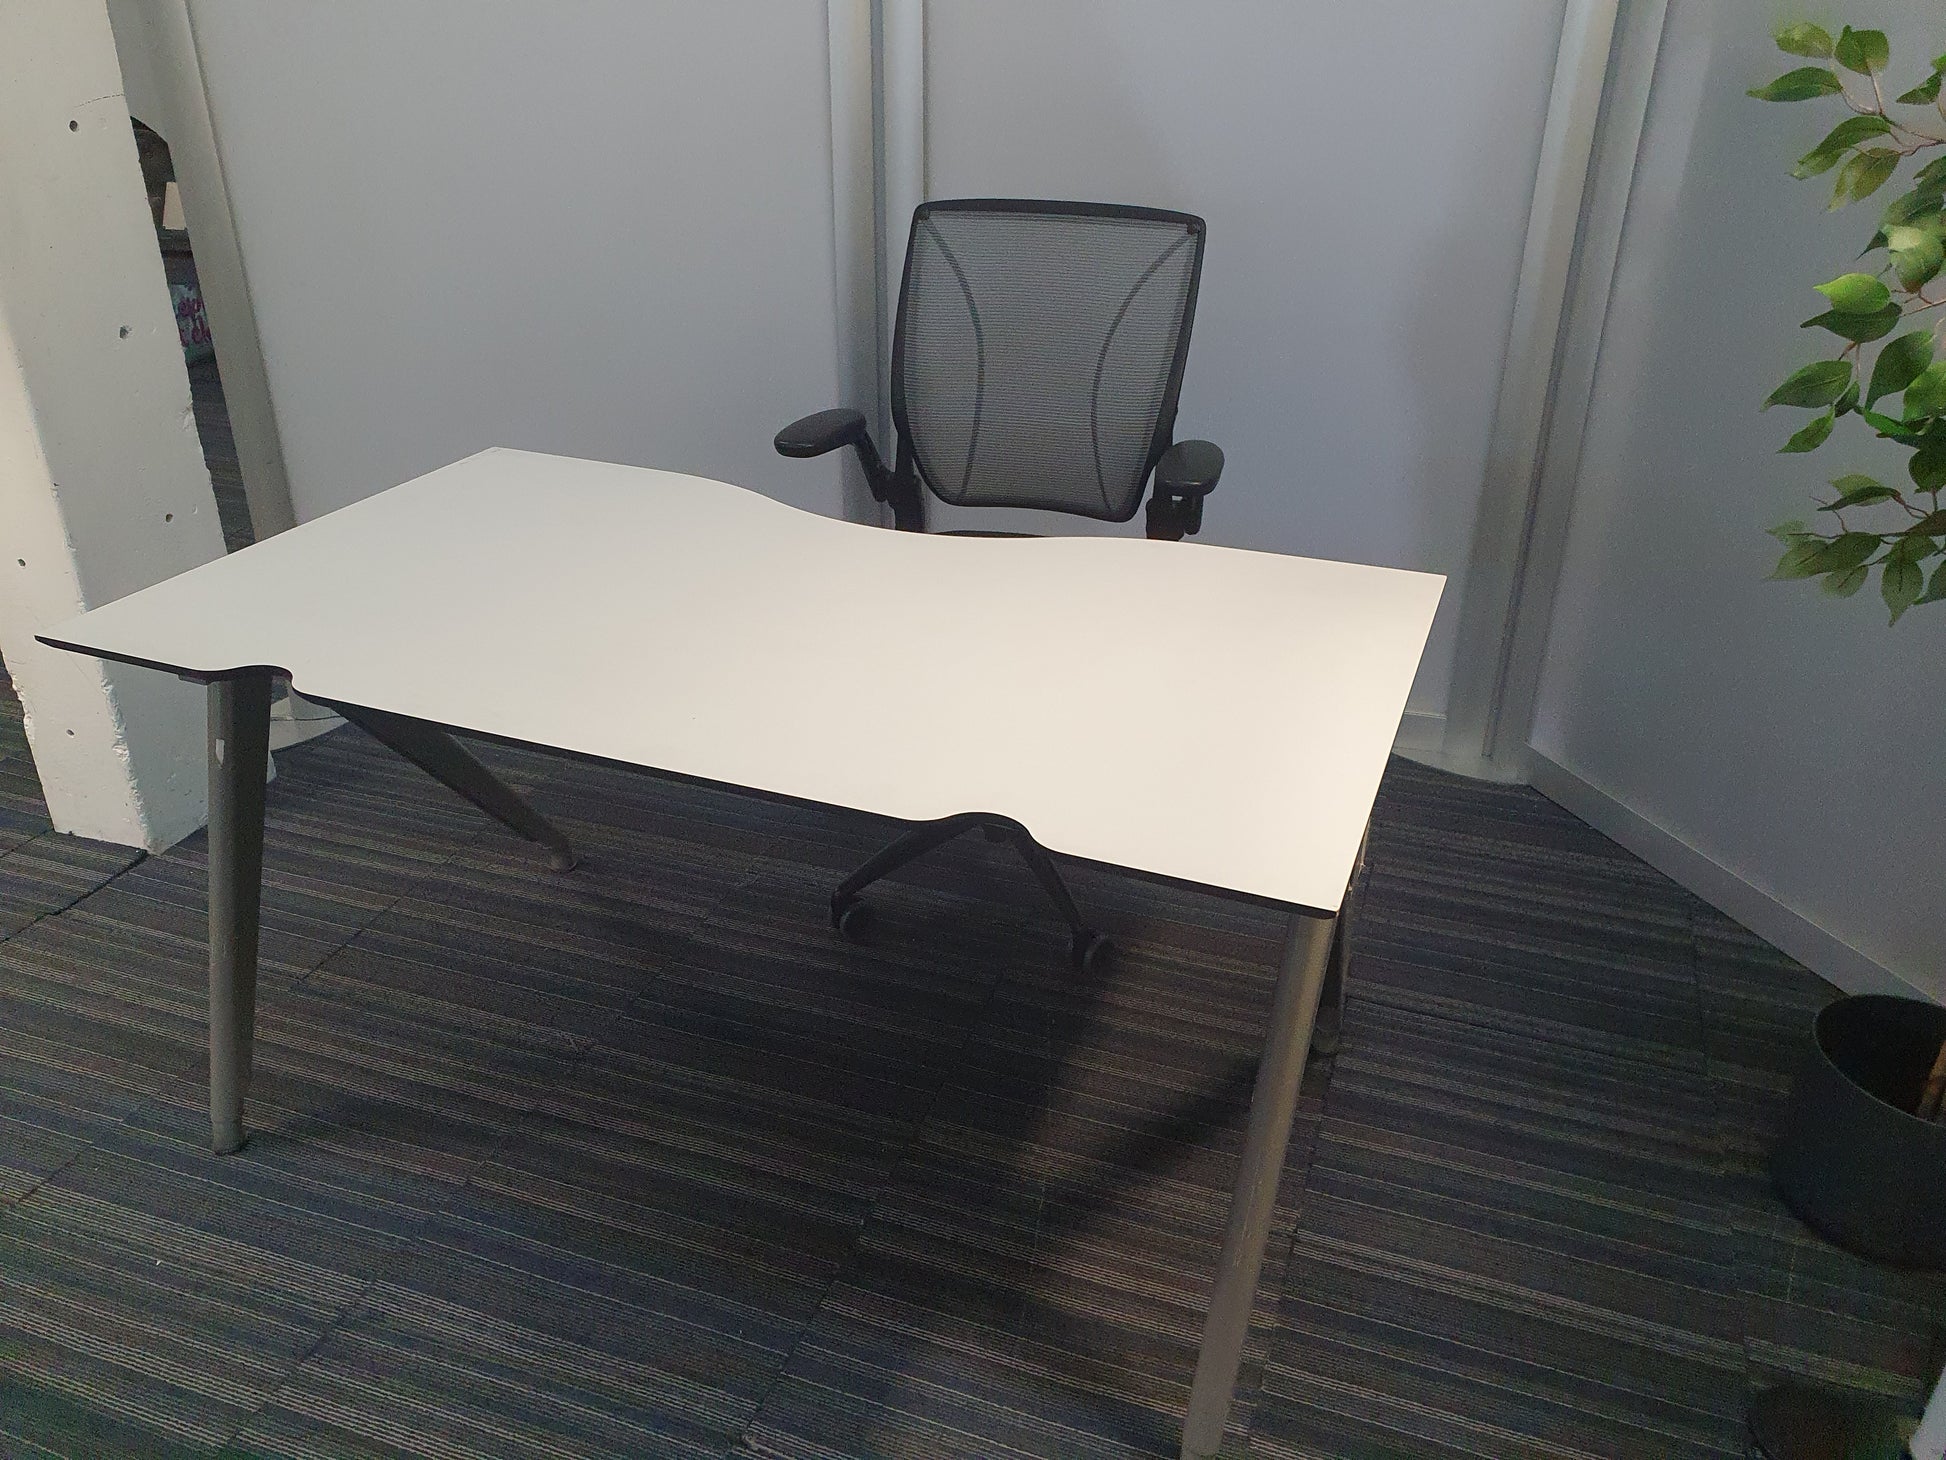 Office desk and chair in front of transloucent dividers